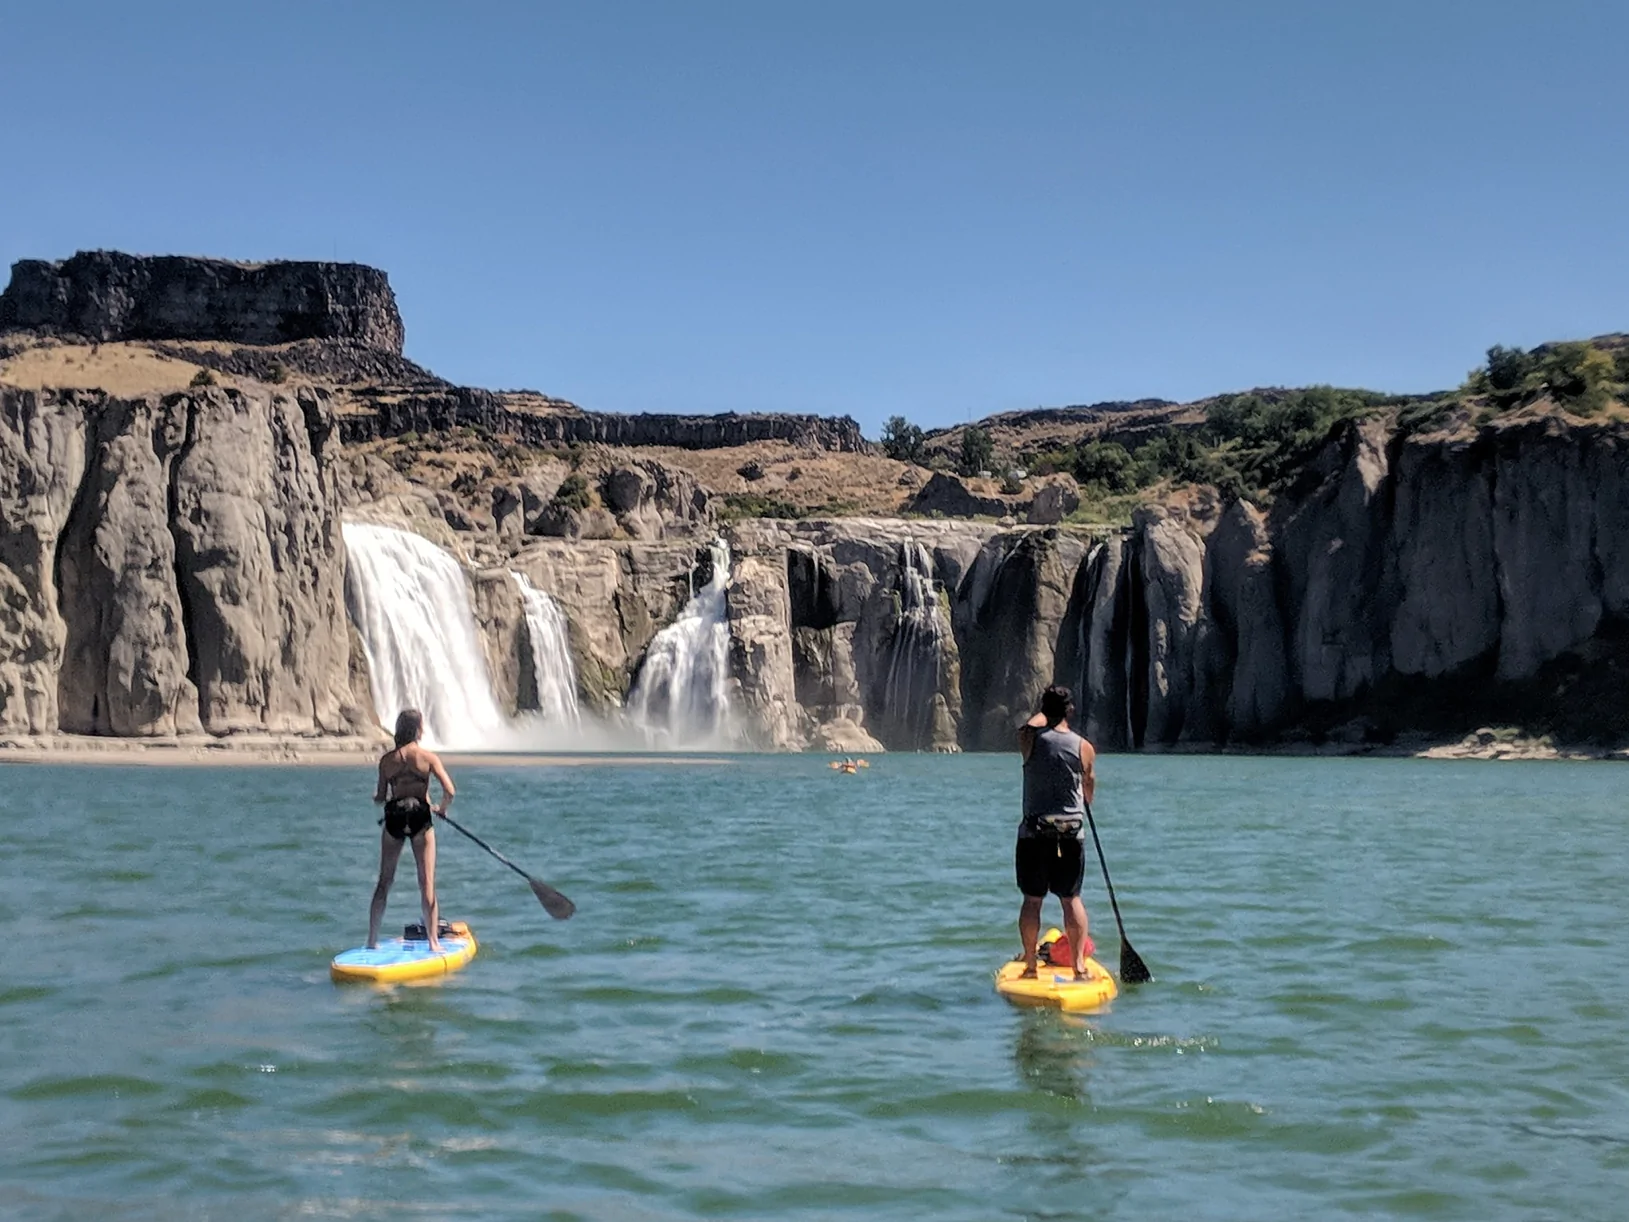 Taking the best river paddle boards to this incredible site. The 212 ft falls look small from our sup board.